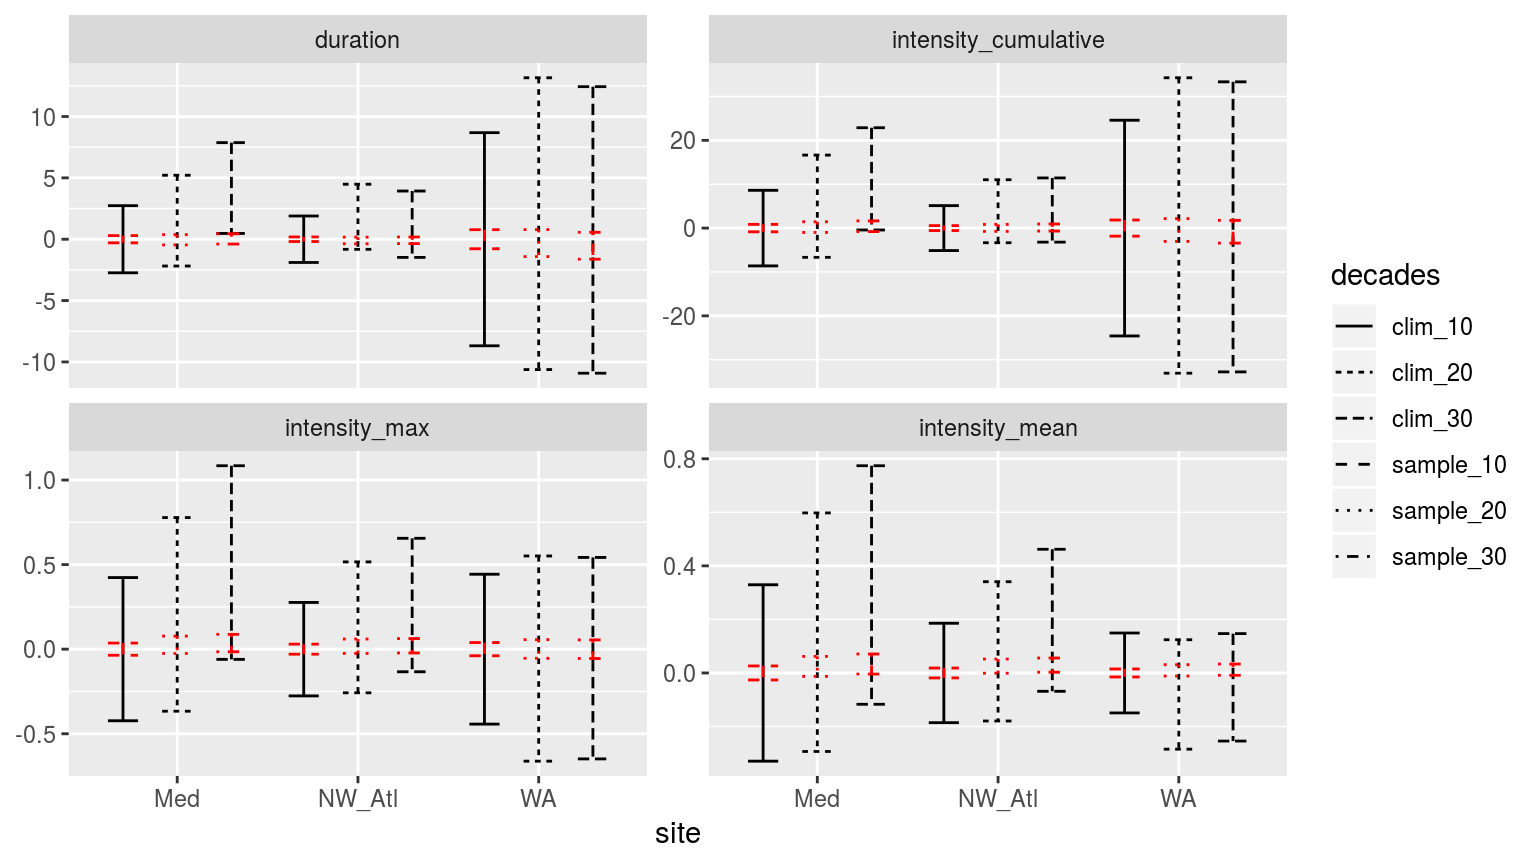 Confidence intervals of the different metrics for the three different clim periods from the population mean based on the 100 times re-sampling of each clim period in red, and the single sample based on the real data in black.